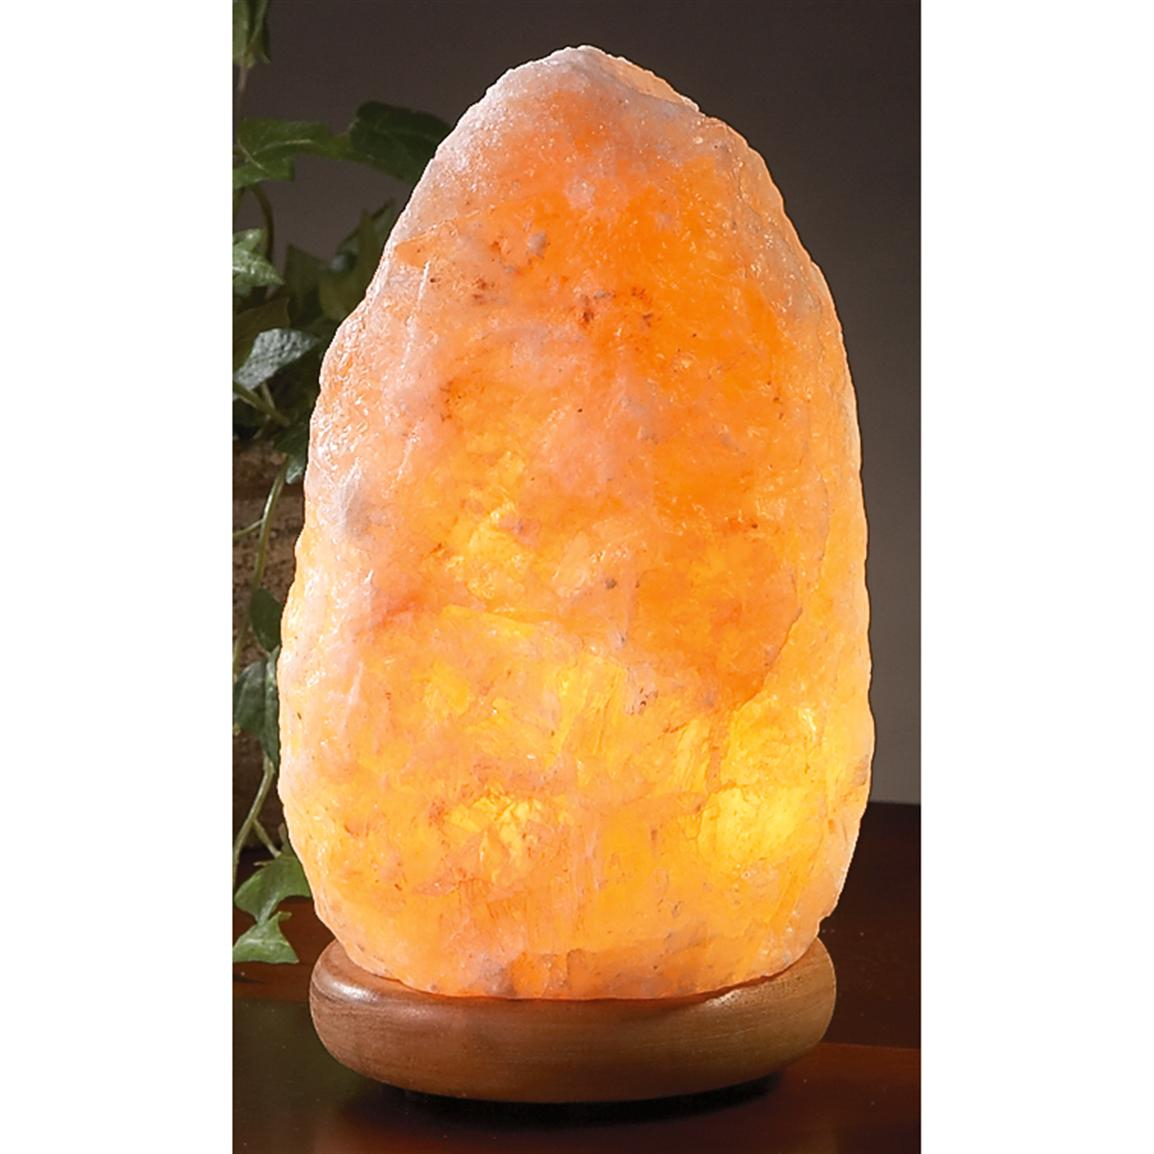 Ionic Crystal Salt Lamp 186603 Healthy Living At Sportsmans Guide intended for sizing 1154 X 1154